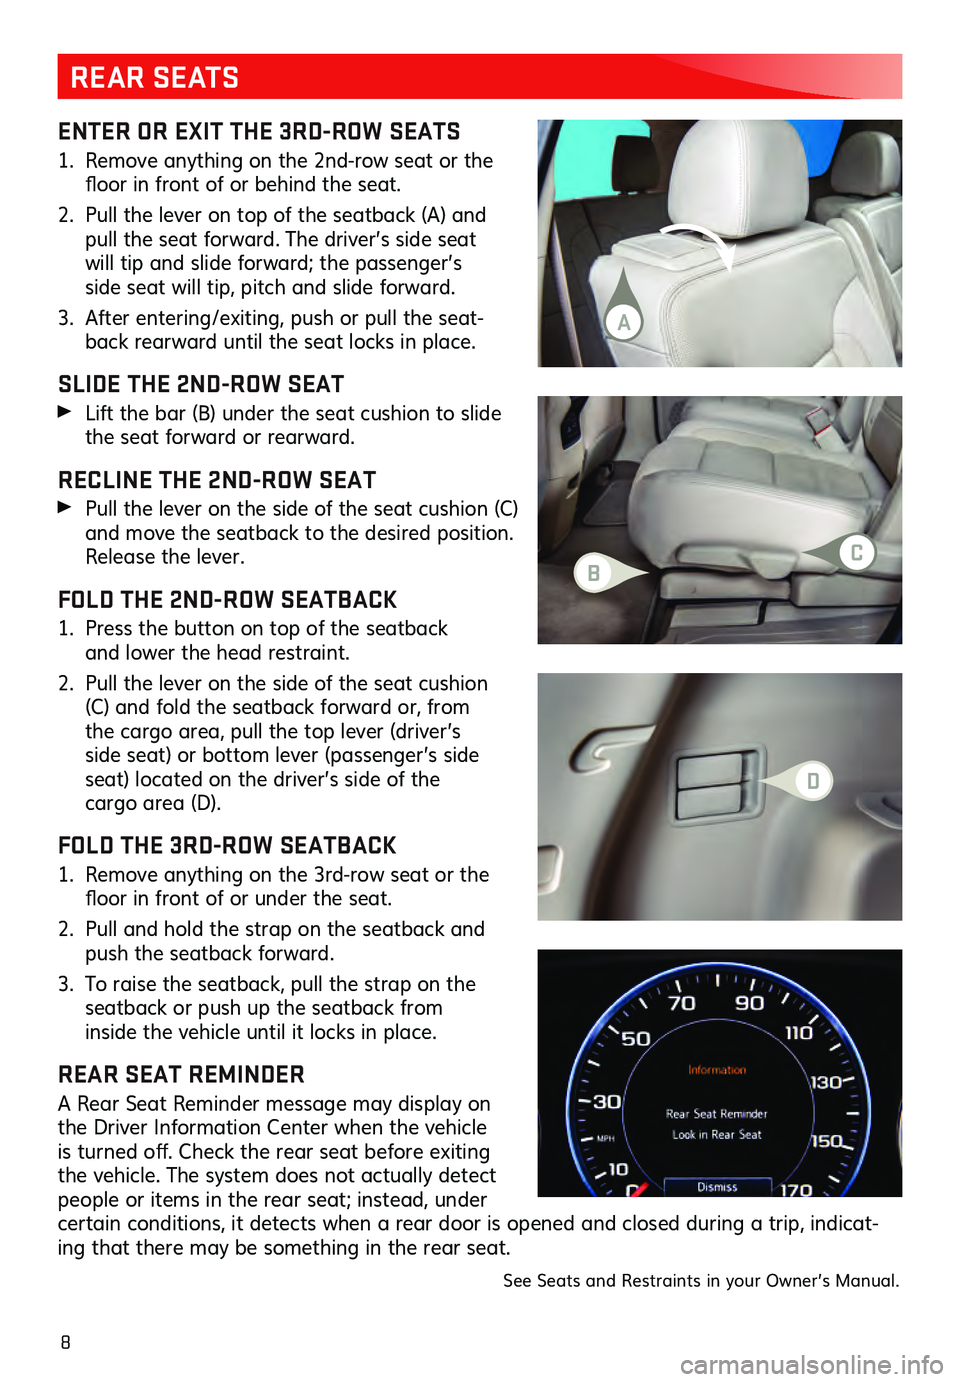 GMC ACADIA 2021  Get To Know Guide 8
ENTER OR EXIT THE 3RD-ROW SEATS
1. Remove anything on the 2nd-row seat or the floor in front  of  or  behind  the  s eat. 
2. Pull the lever on top of the s eatback (A) and pull the seat for